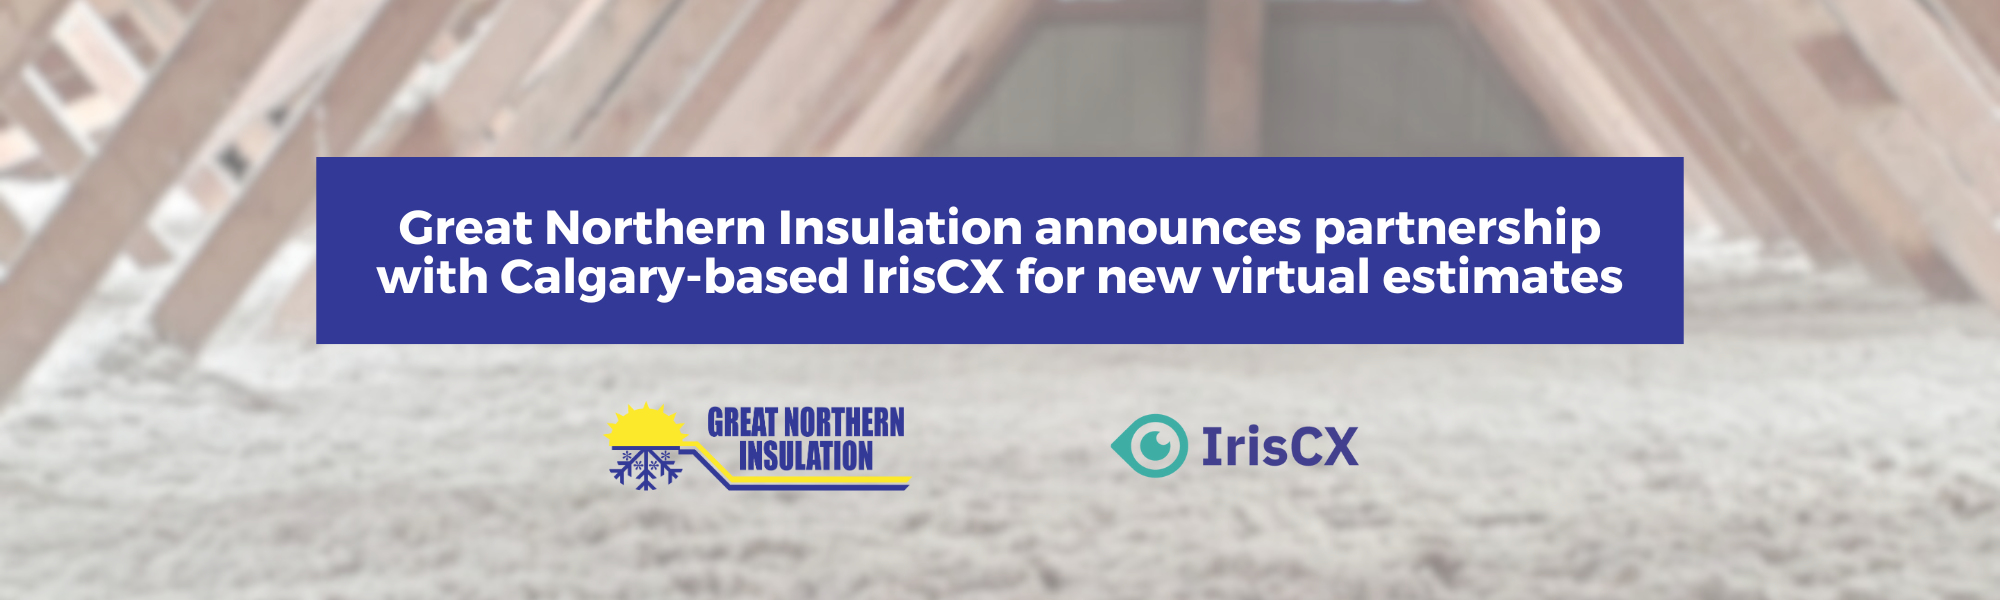 Great Northern Insulation announces partnership with Calgary-based IrisCX for new virtual estimates